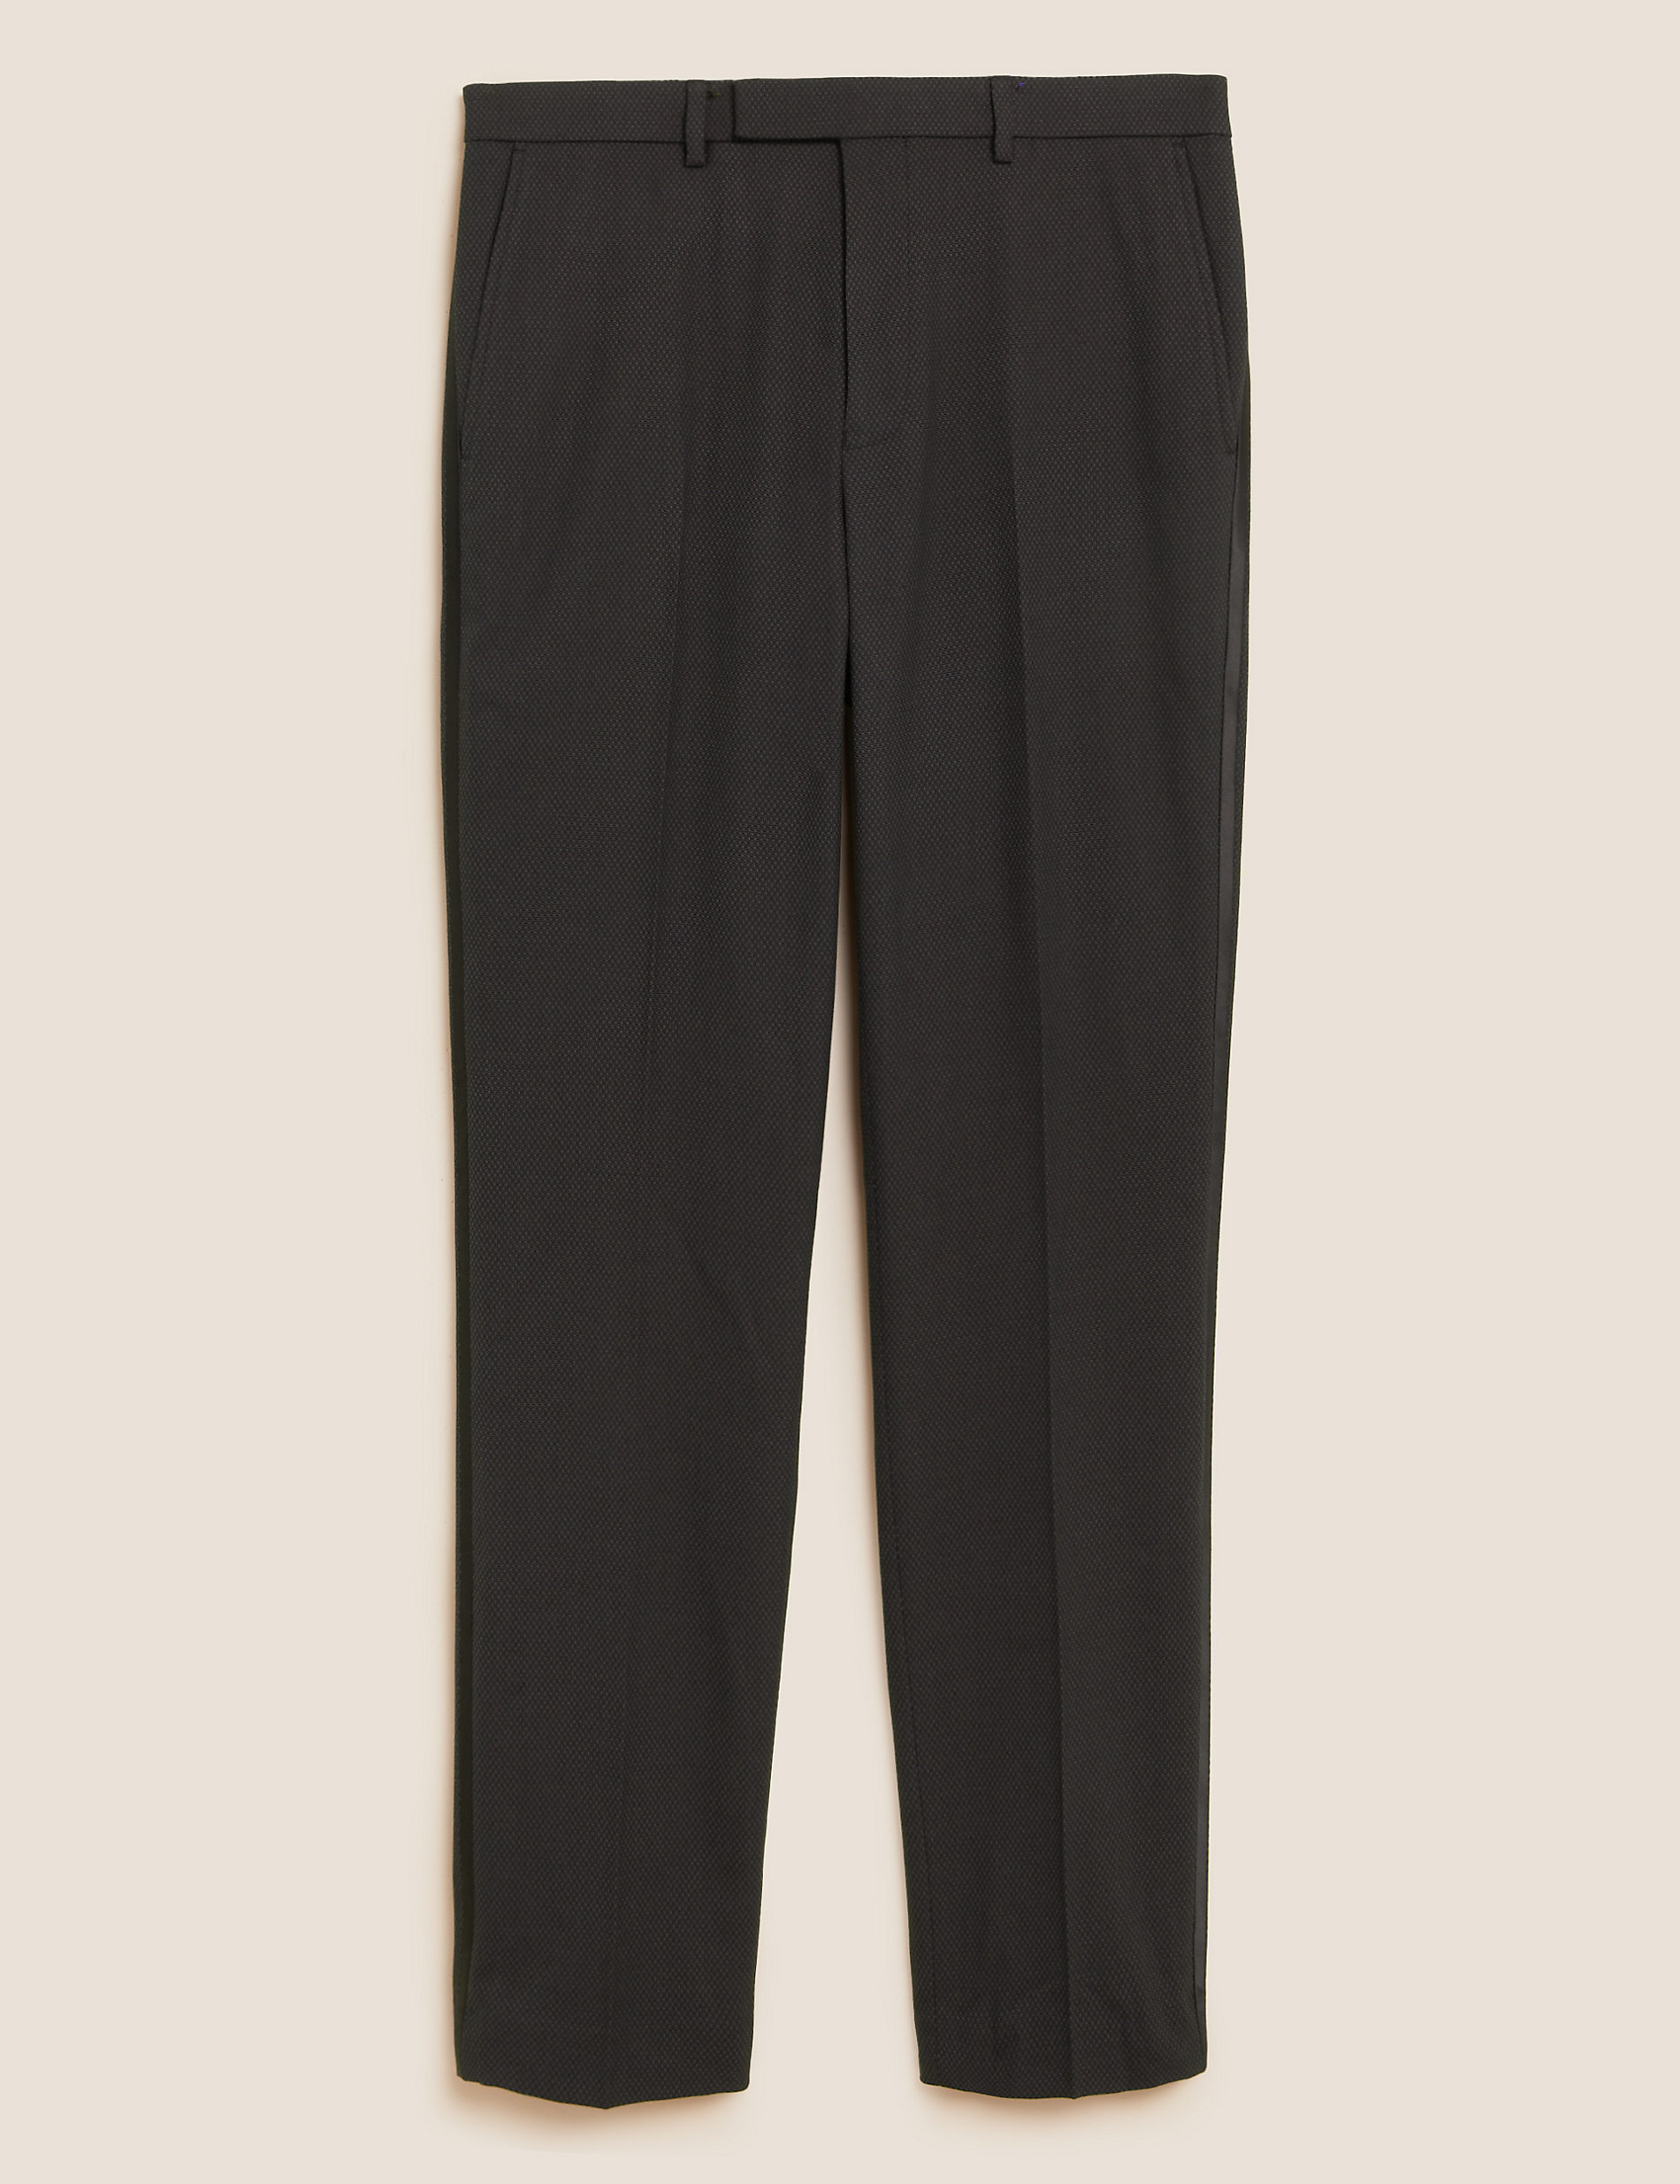 Charcoal Slim Fit Trousers